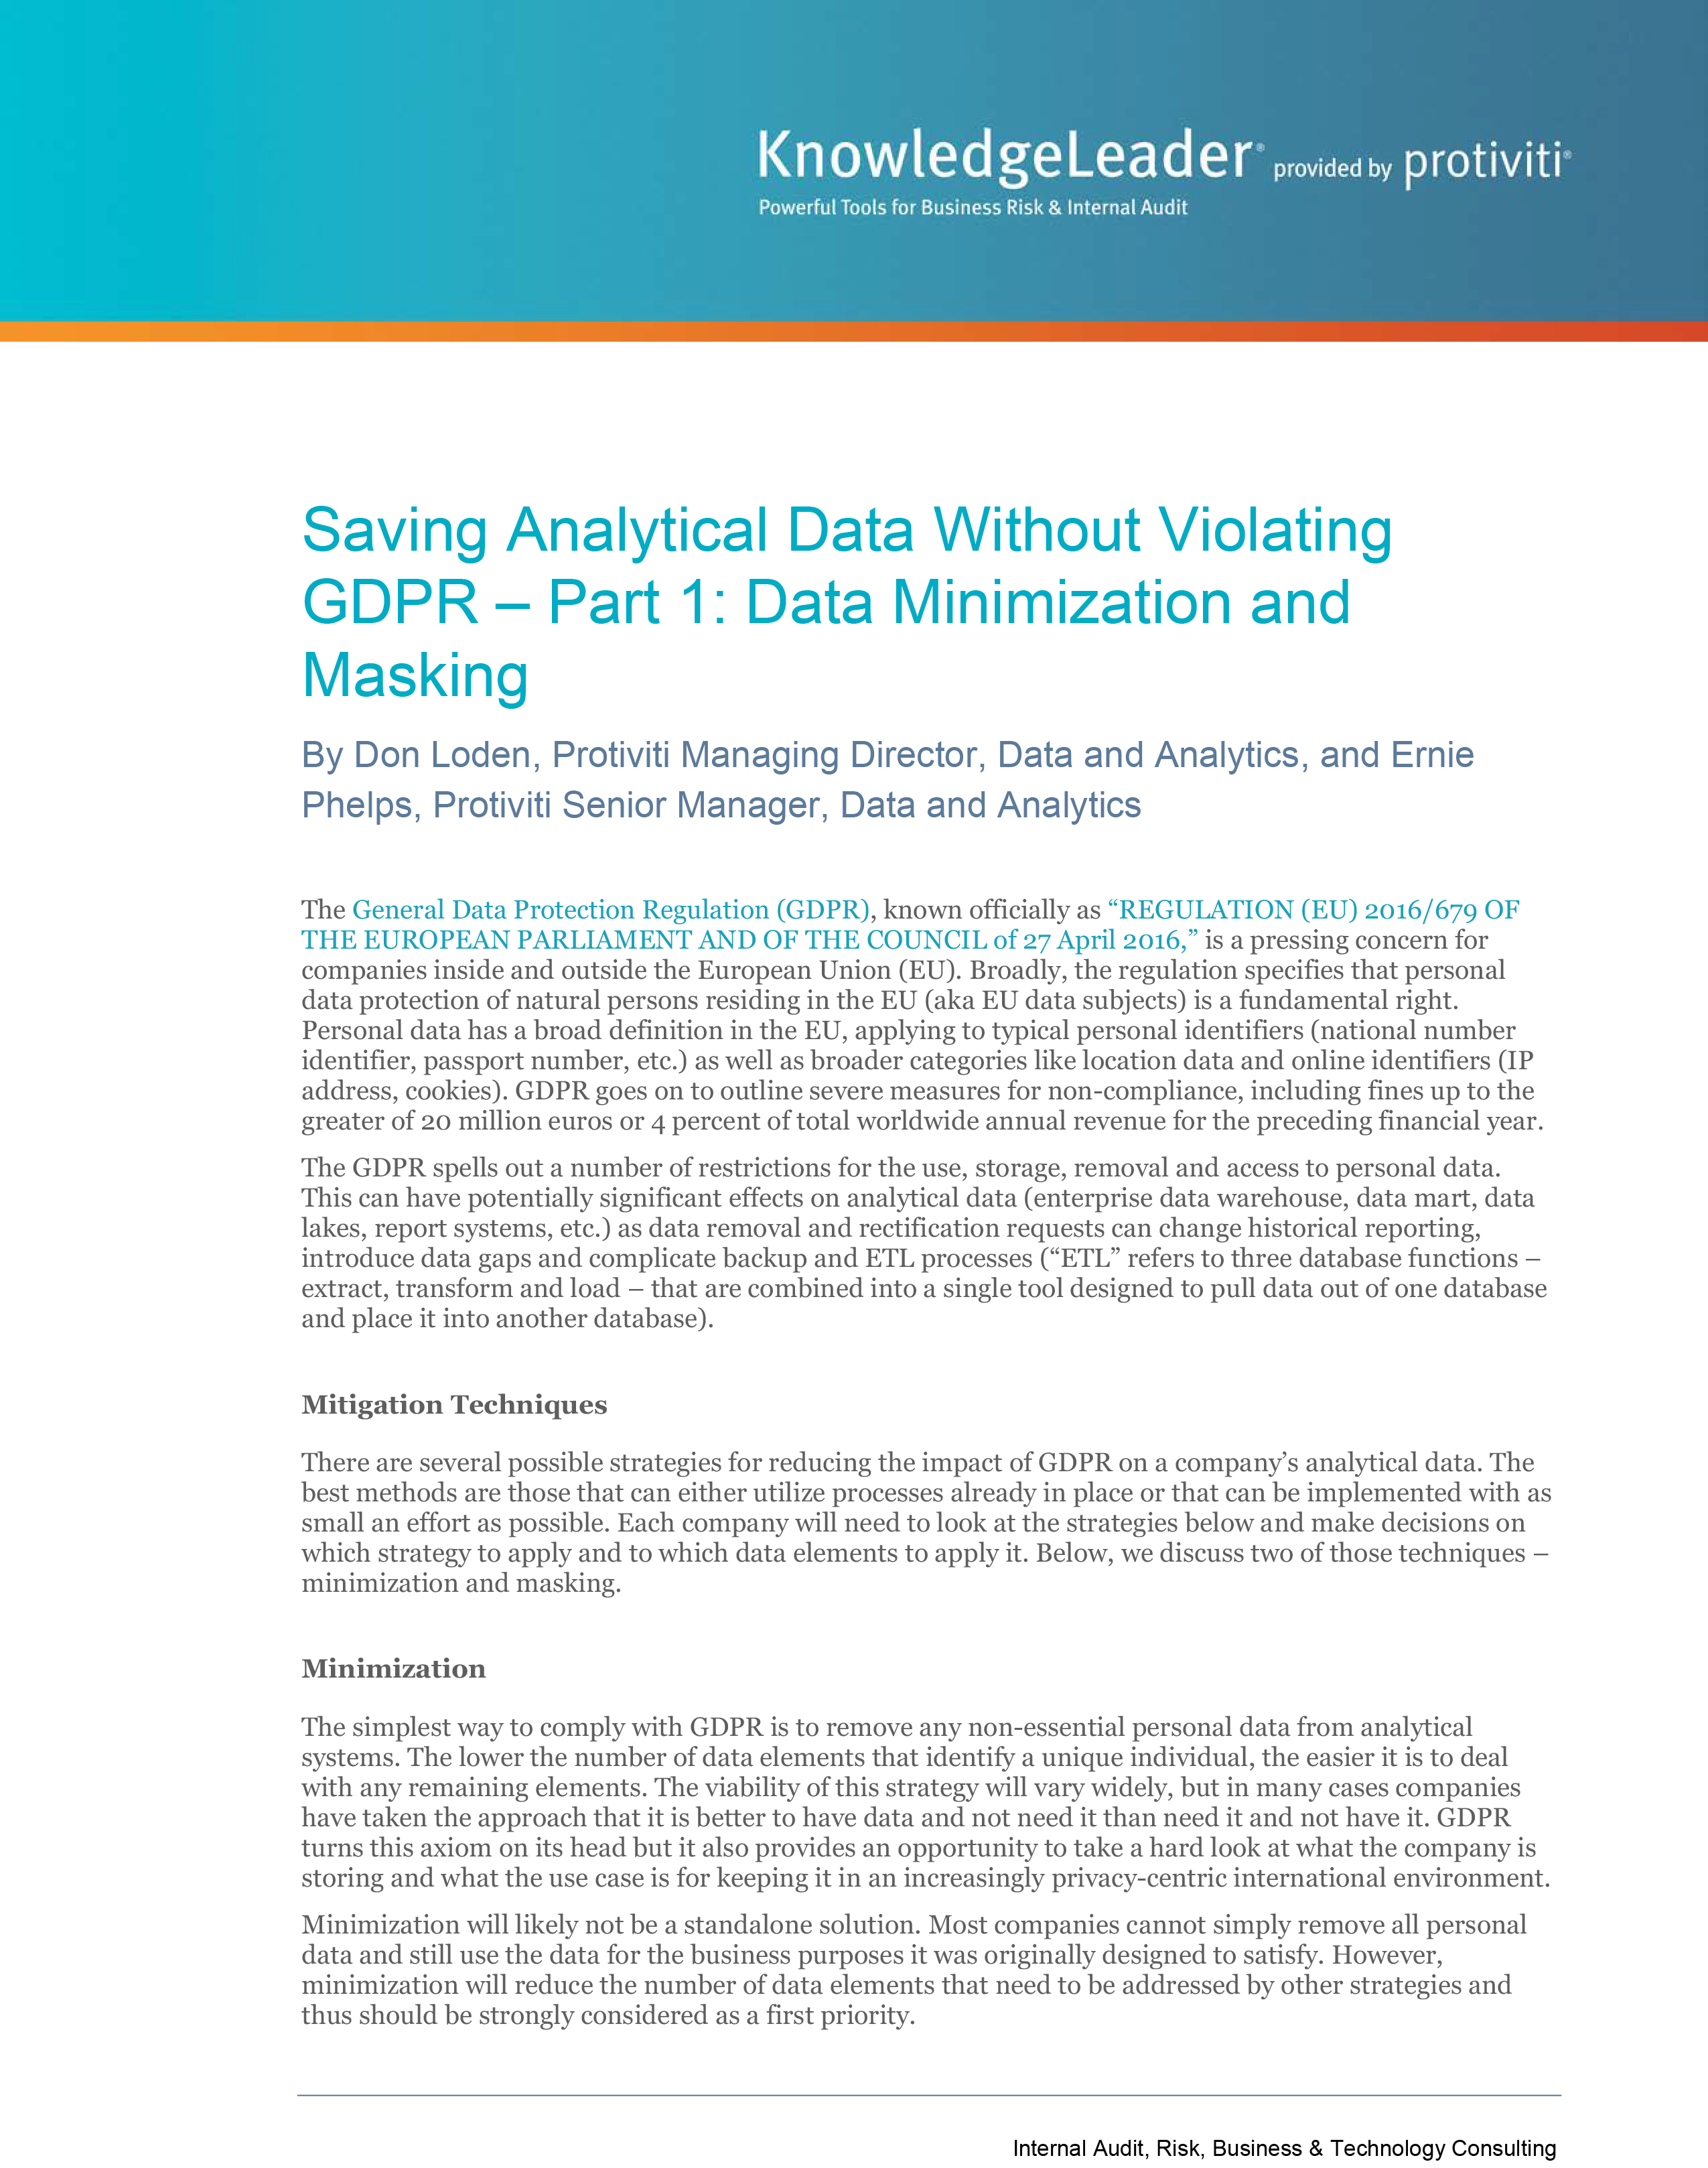 Screenshot of the first page of Saving Analytical Data Without Violating GDPR – Part 1-Data Minimizing and Masking